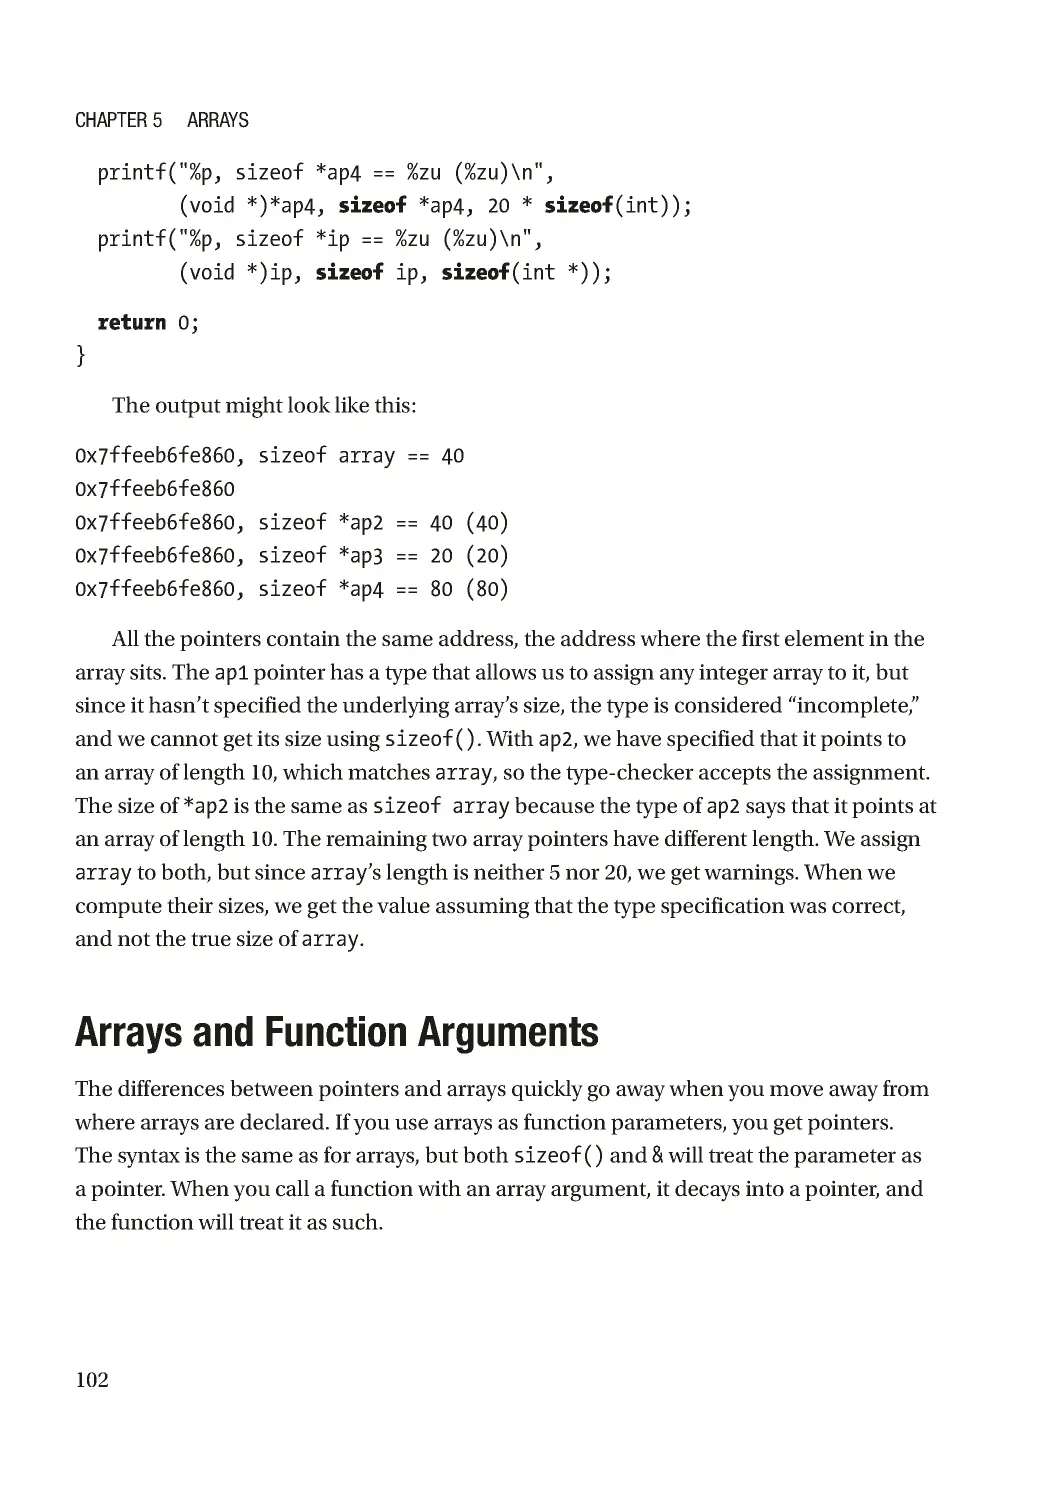 Arrays and Function Arguments